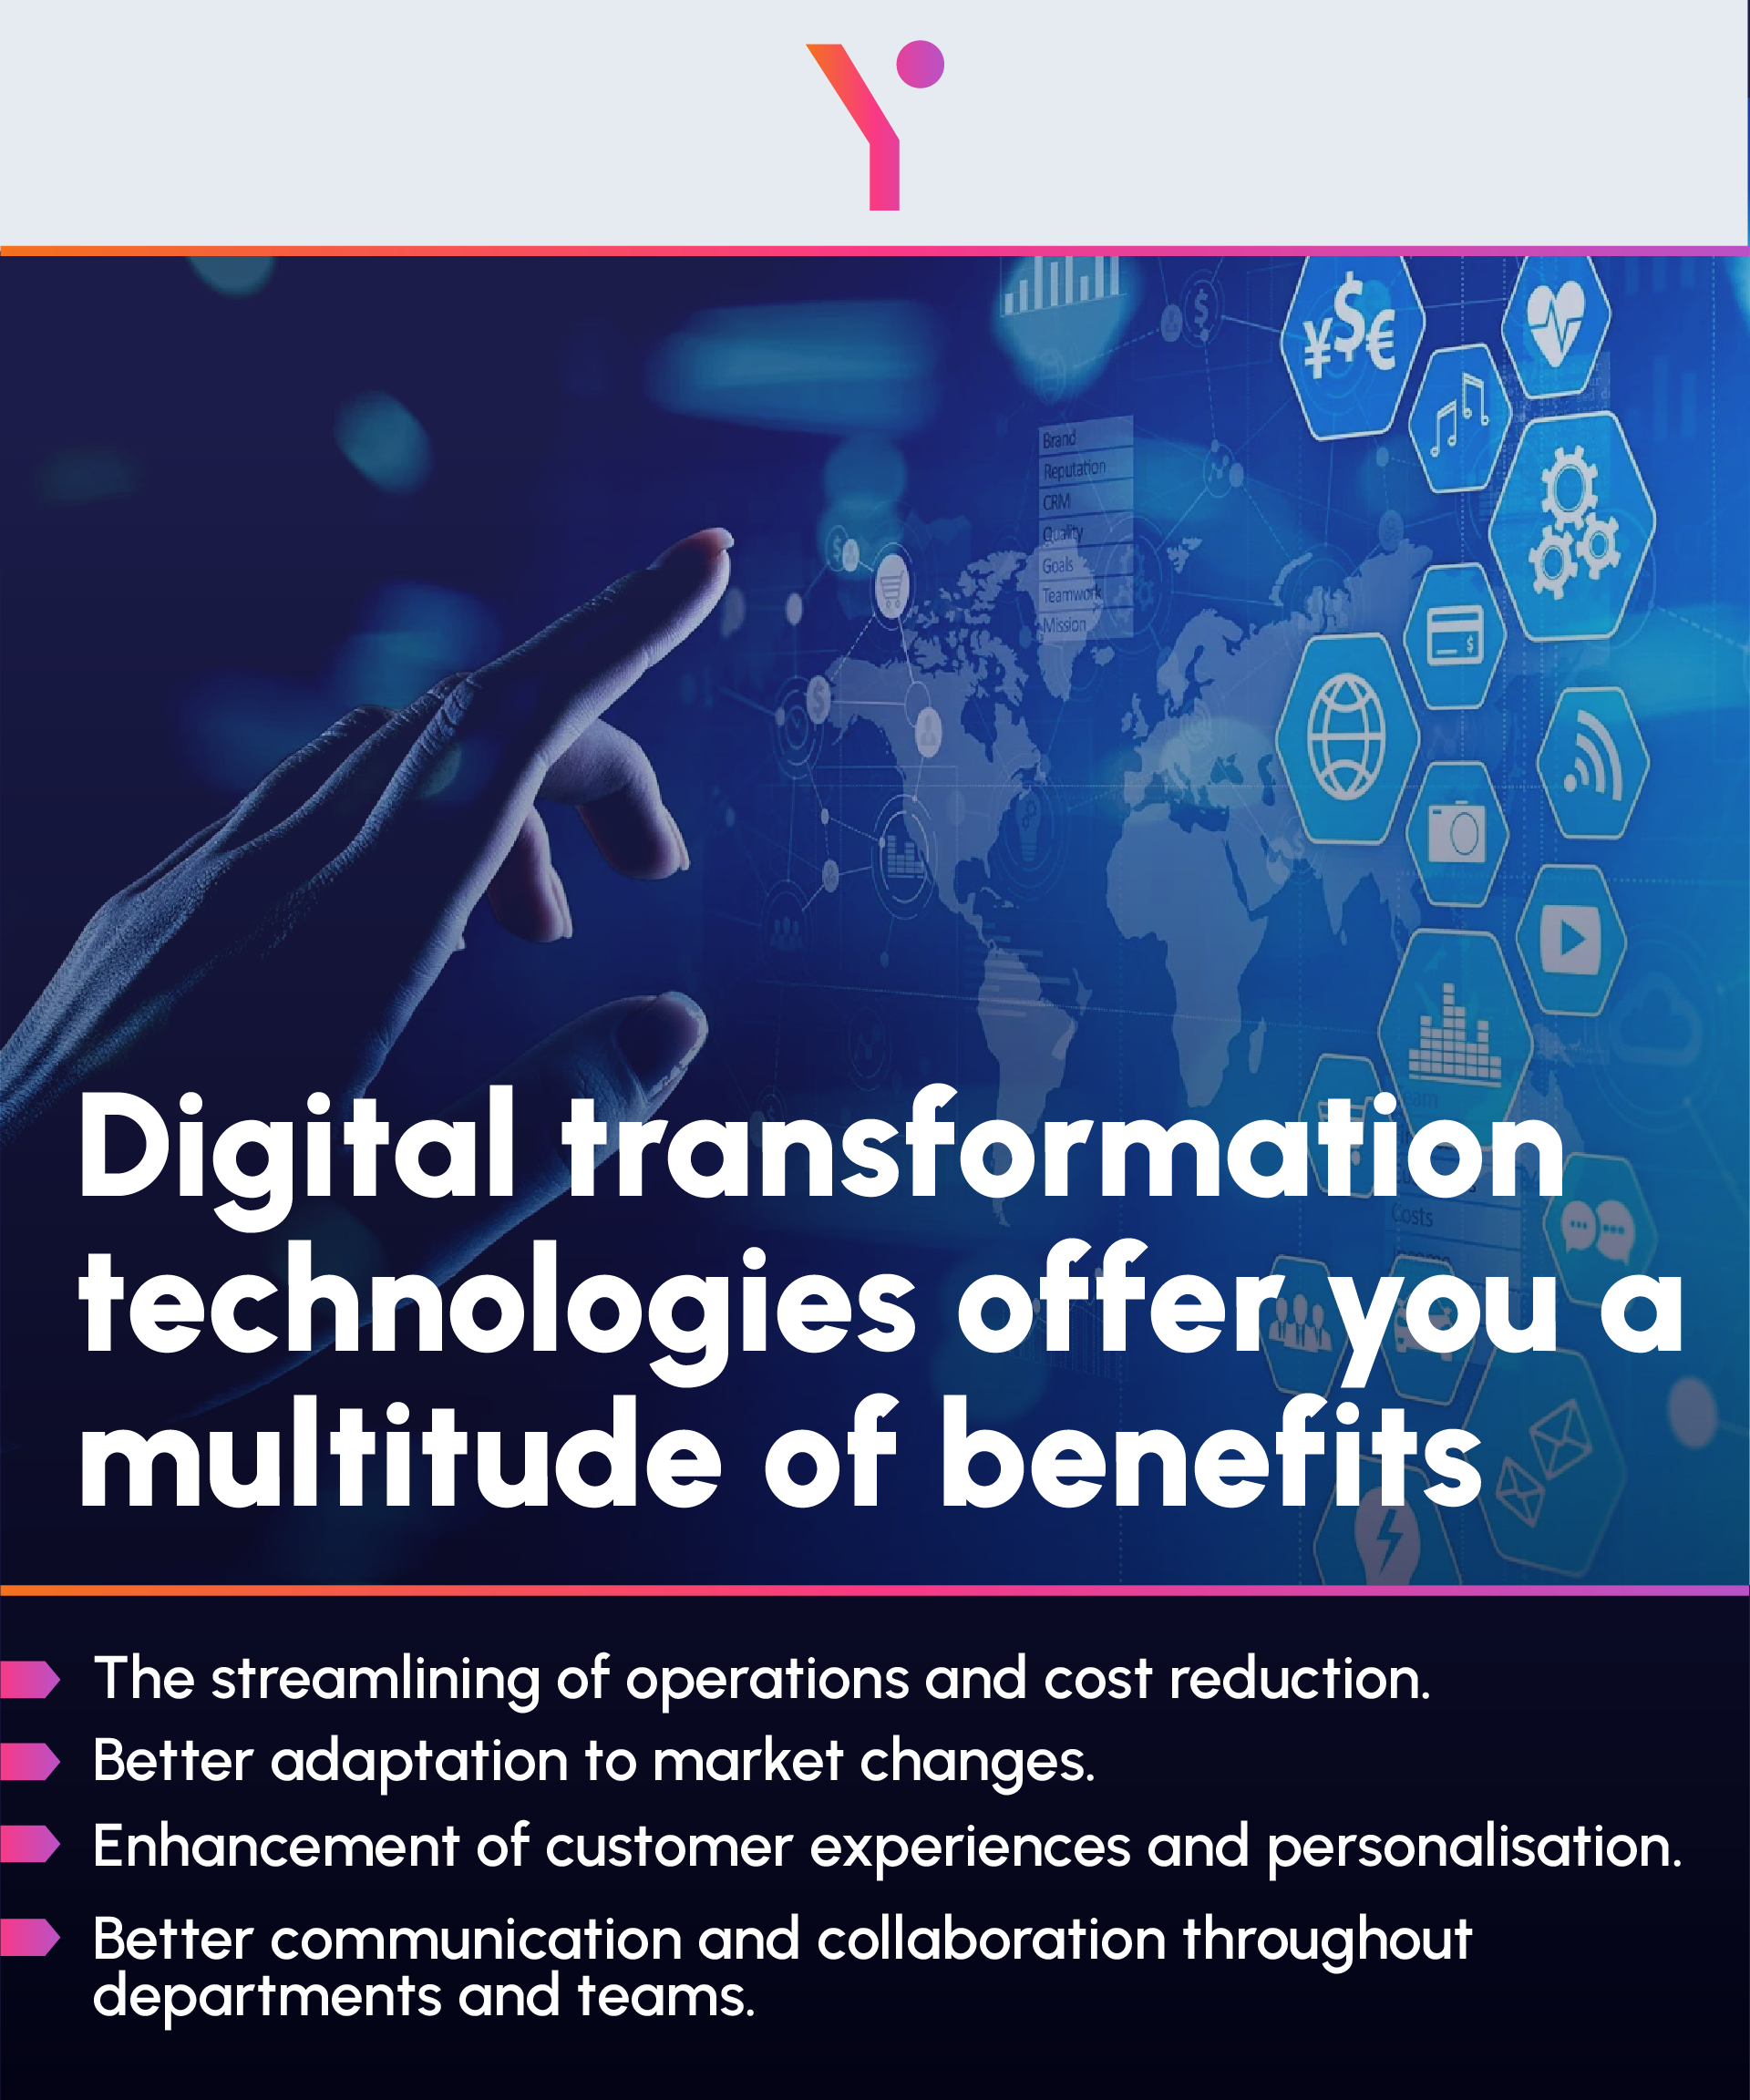 Pointers of the benefits of digital transformation technologies in infographic form